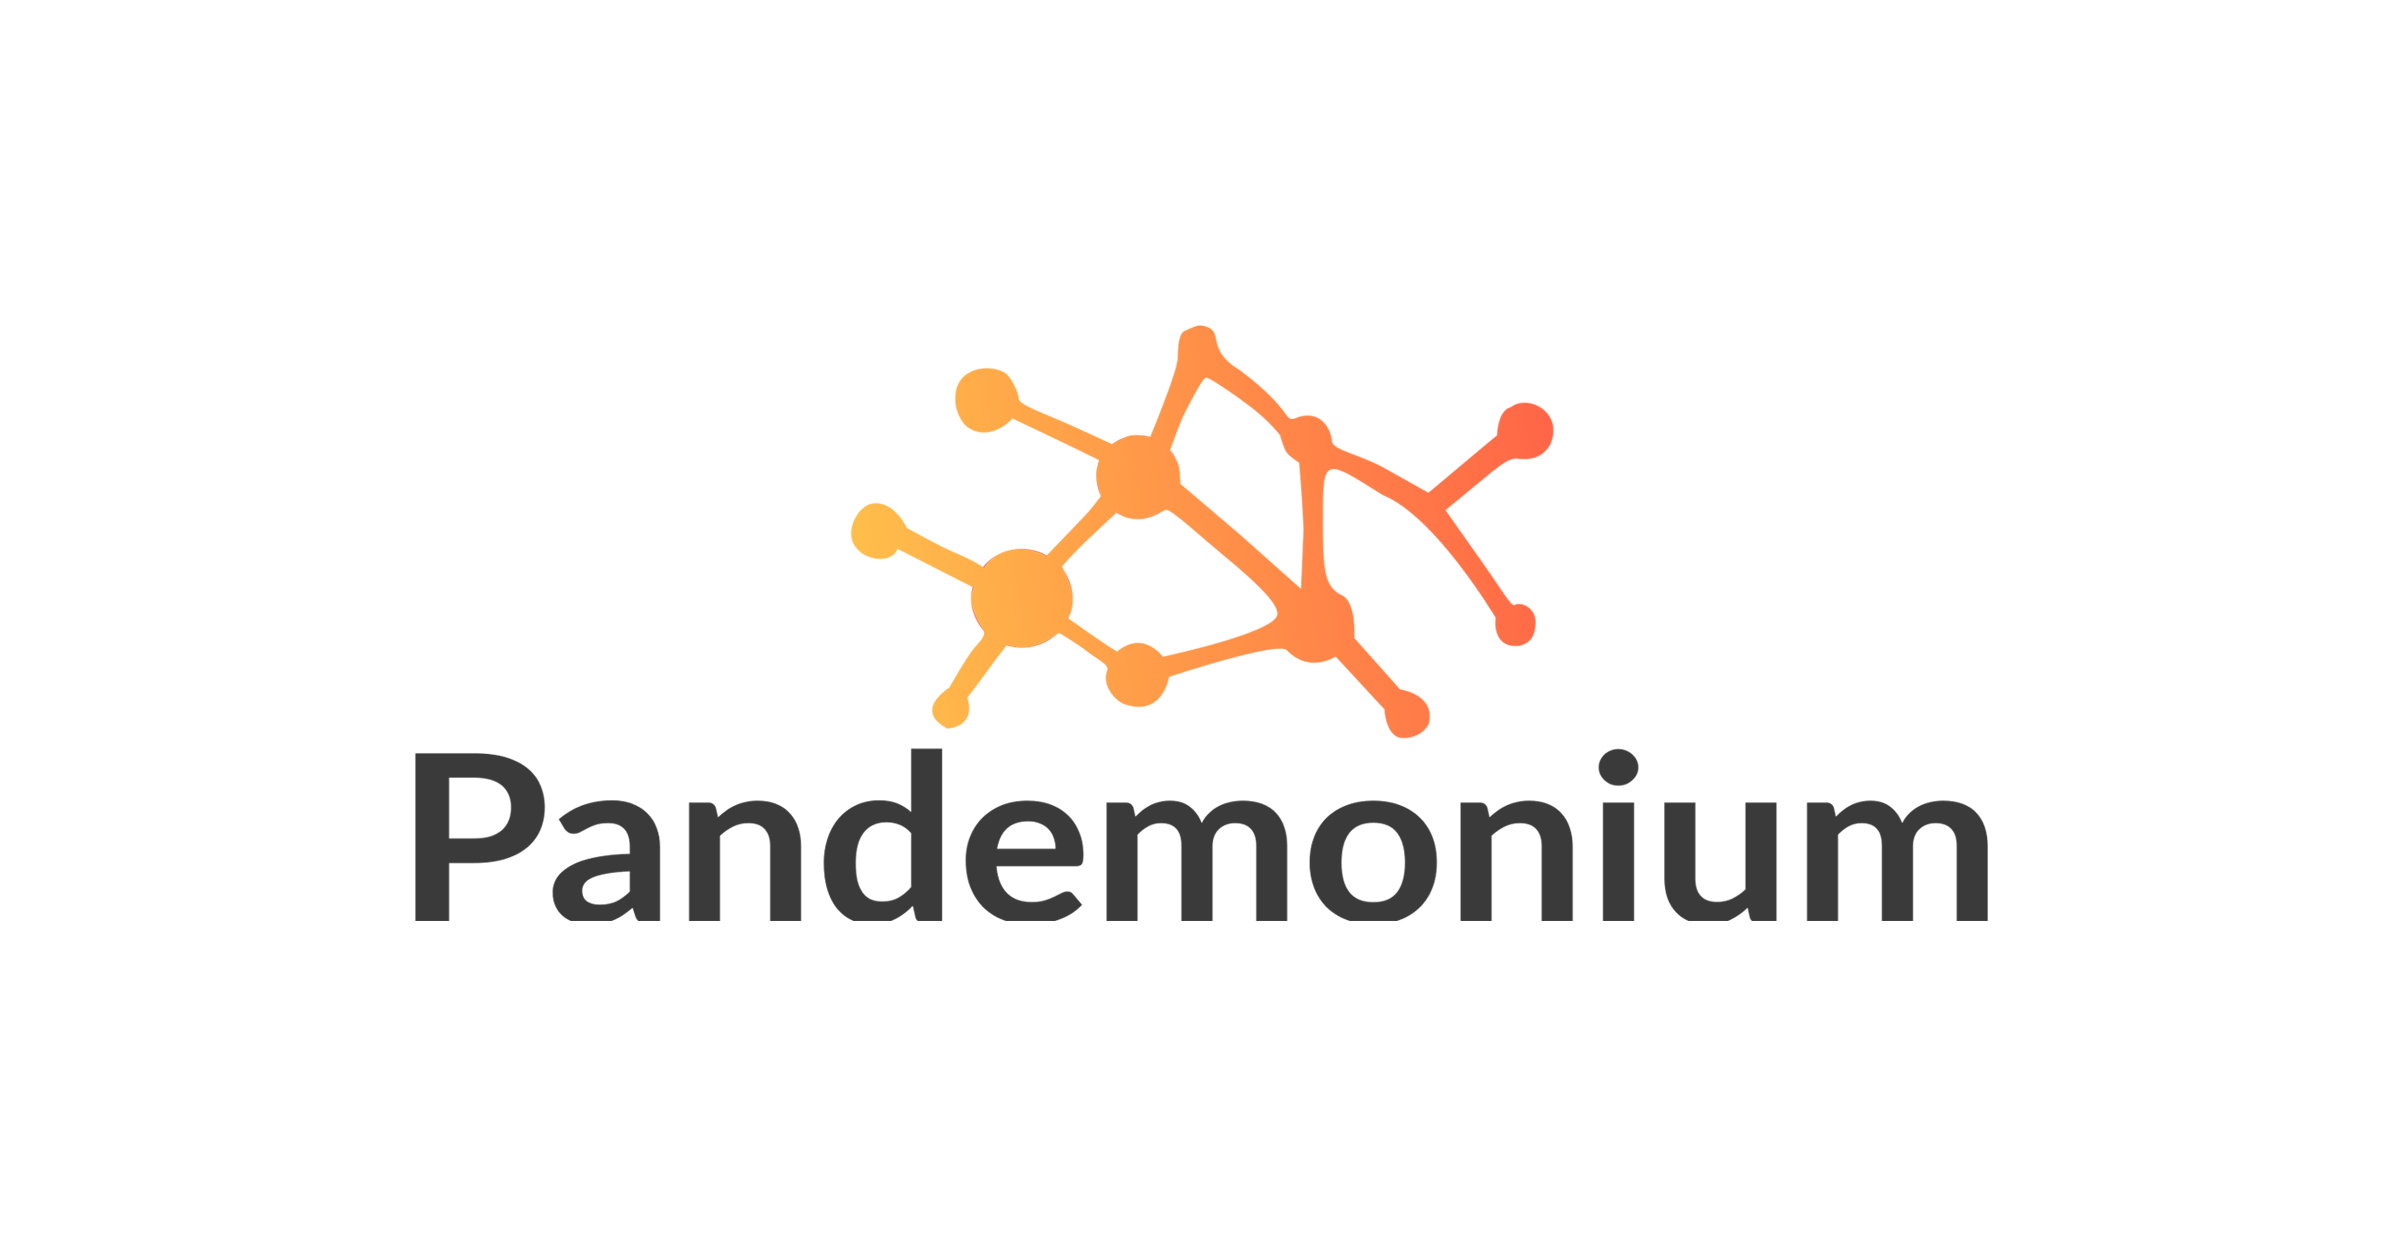 COVID-19 Risk Assessment App Pandemonium Uses AnyChart for Data Visualization